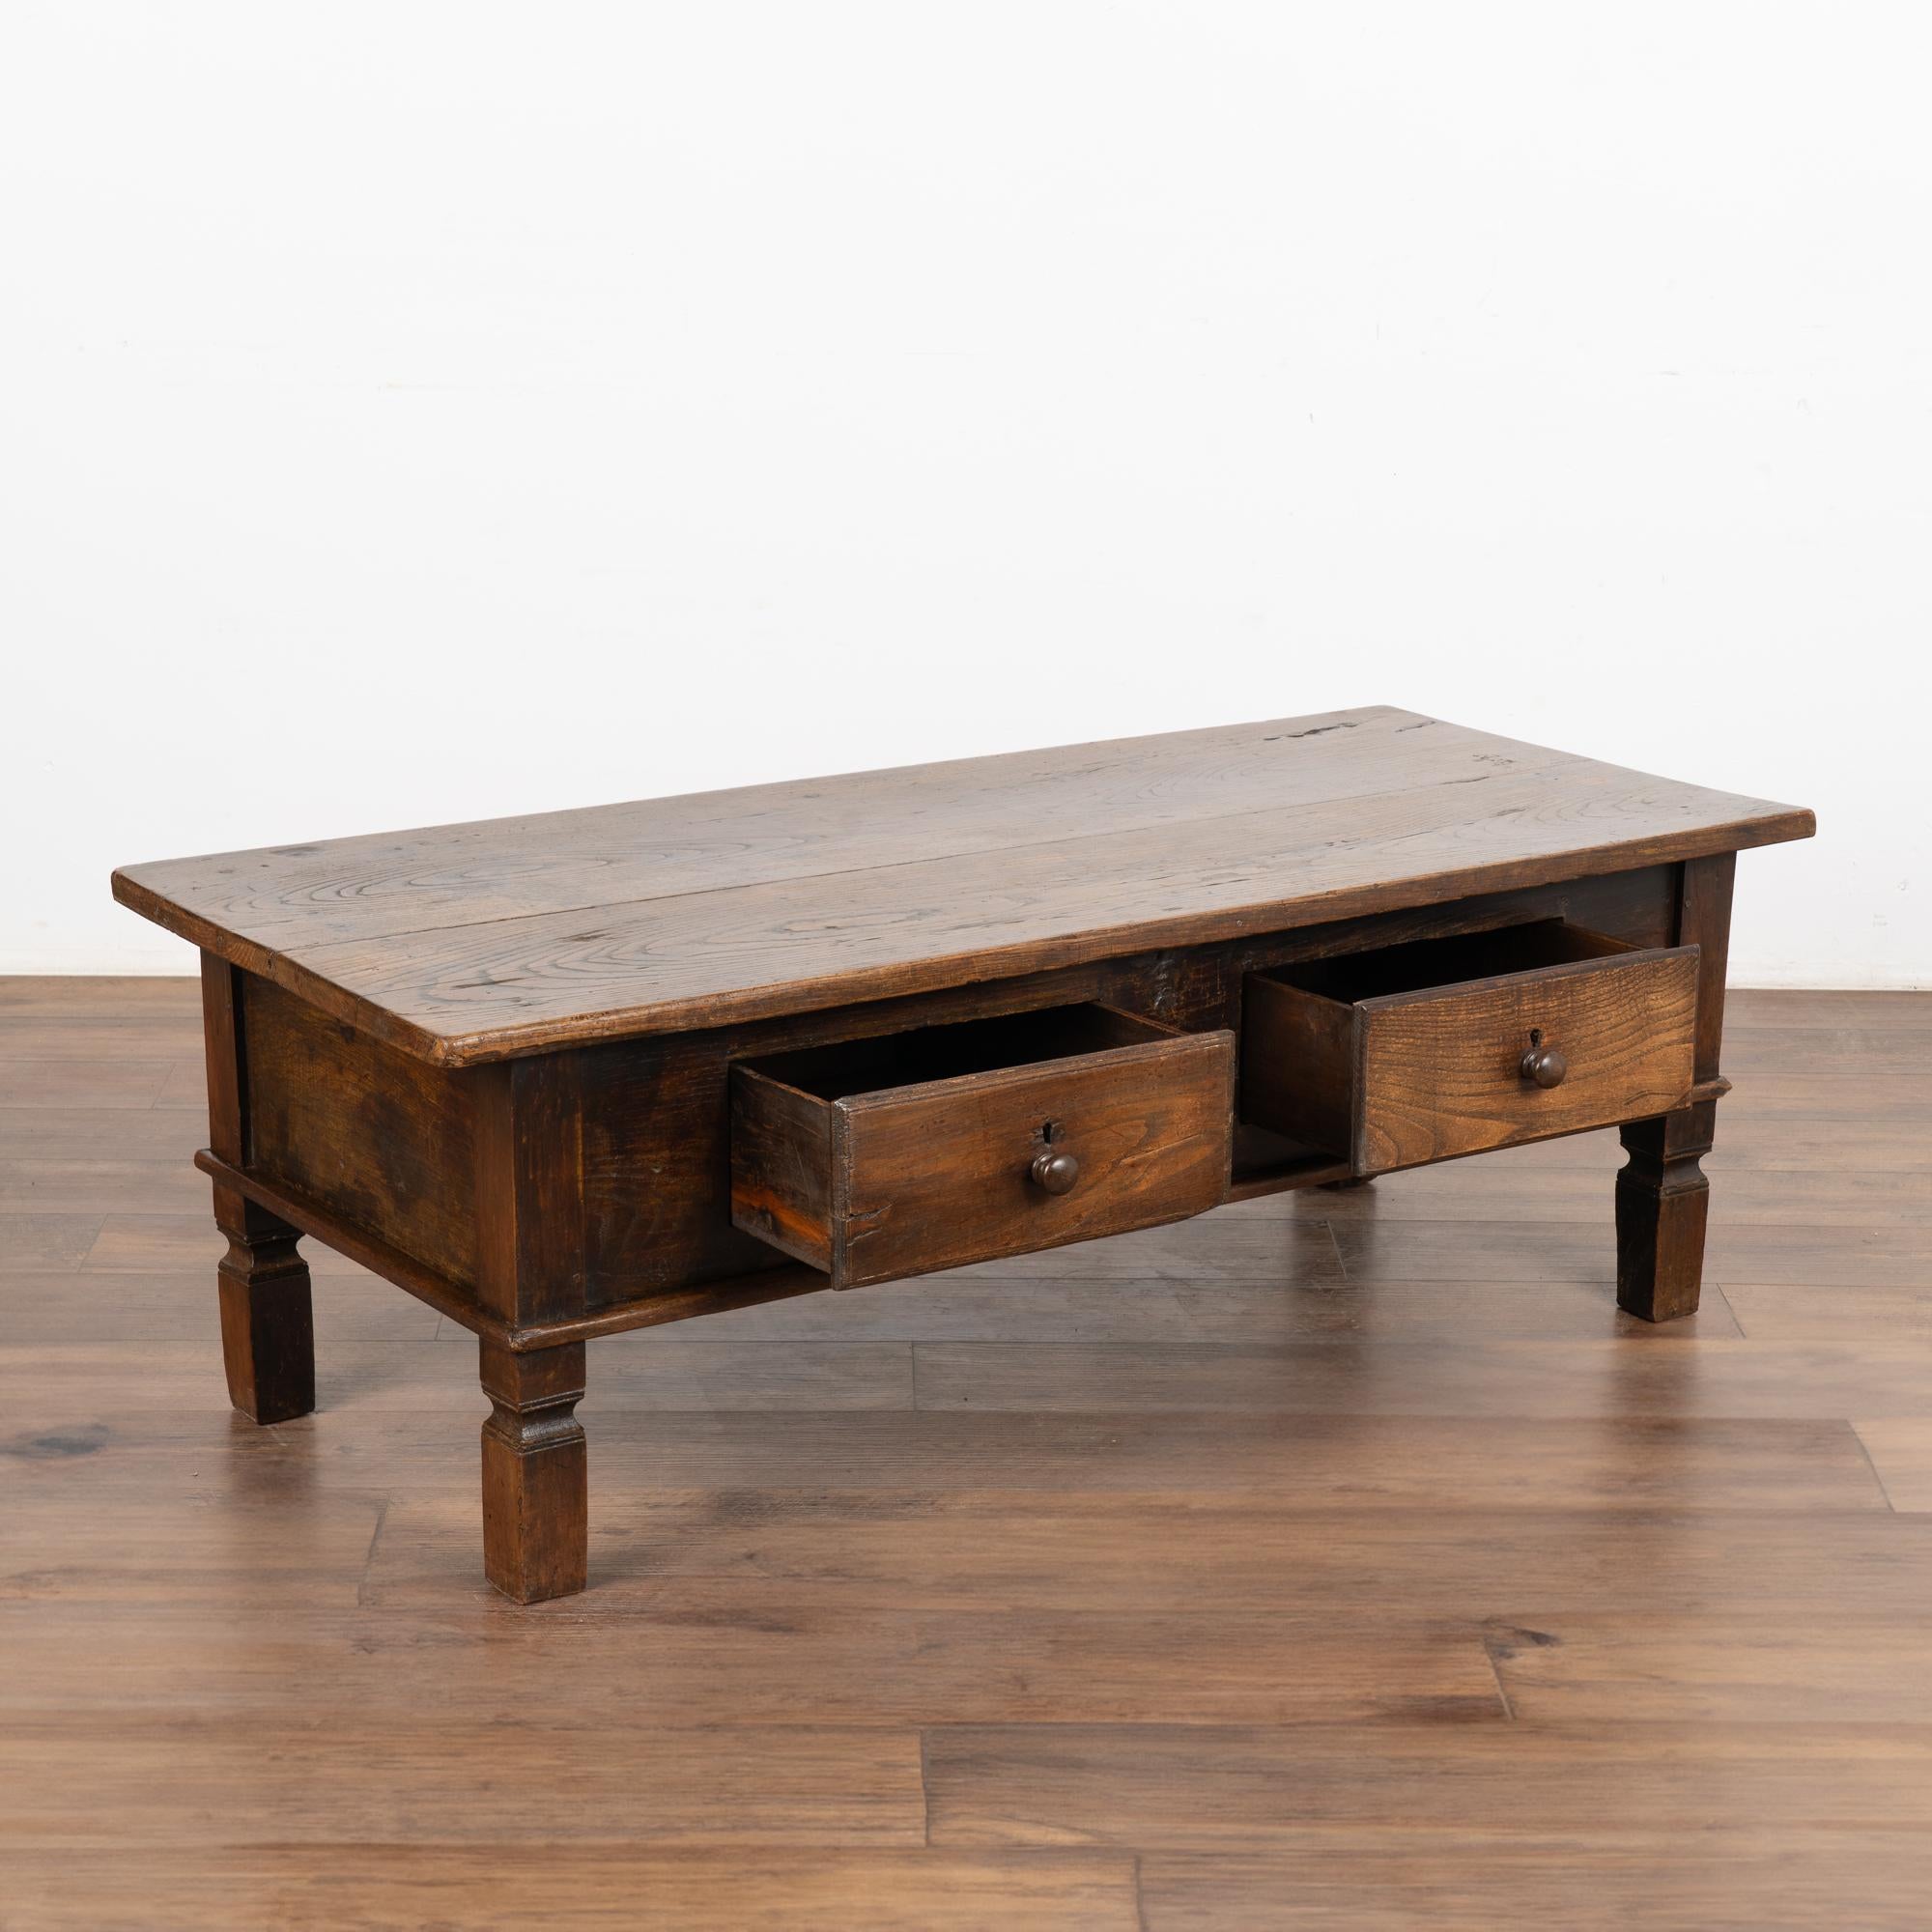 Two Drawer French Country Oak Coffee Table, circa 1820-40 In Good Condition For Sale In Round Top, TX